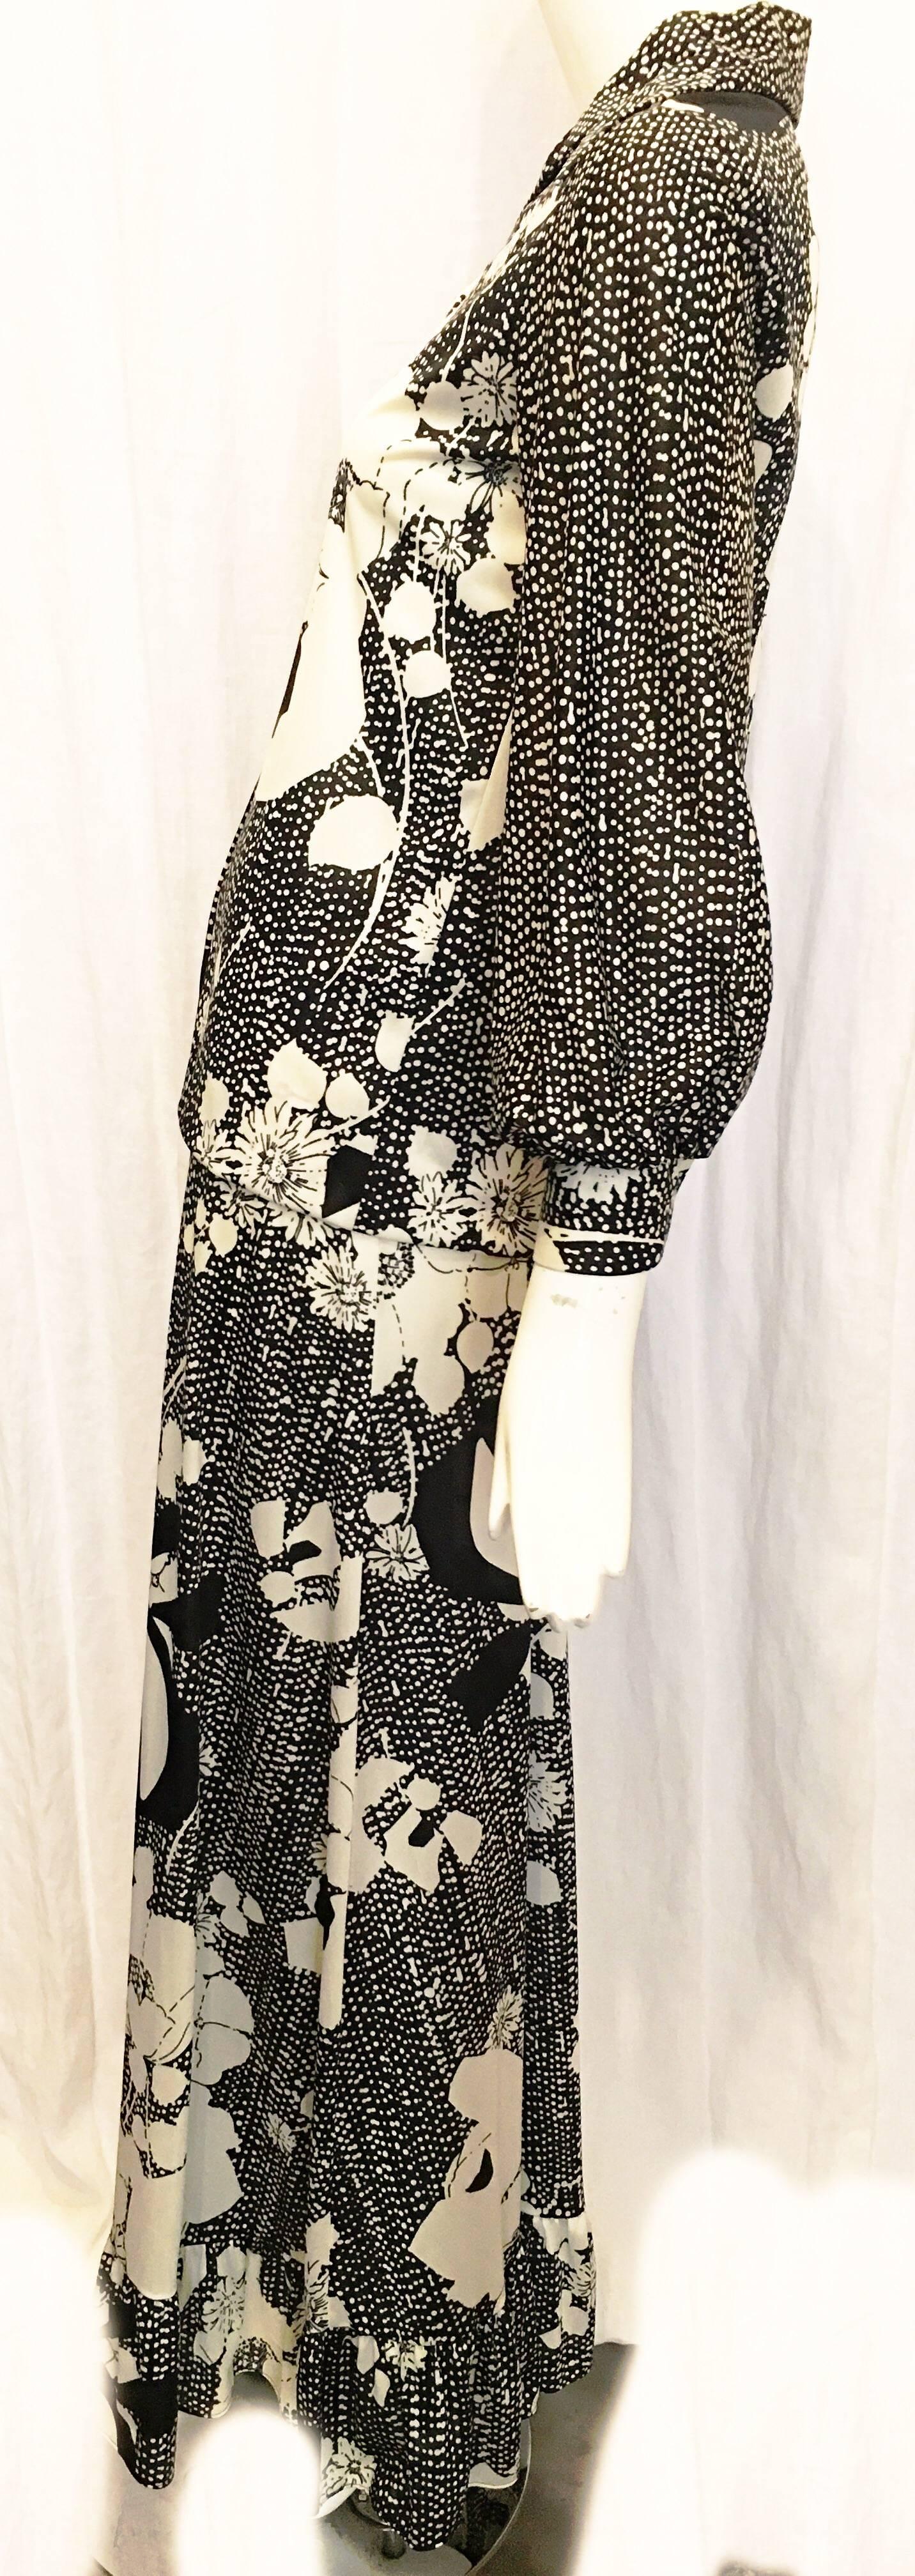 White and black floral skirt suit in the style of Hawaiian textiles. Top is button down with five buttons down the front and a single button at each cuff of the sleeves. Hem is hand sewn. Skirt is full length with ruffle trim and elastic at the